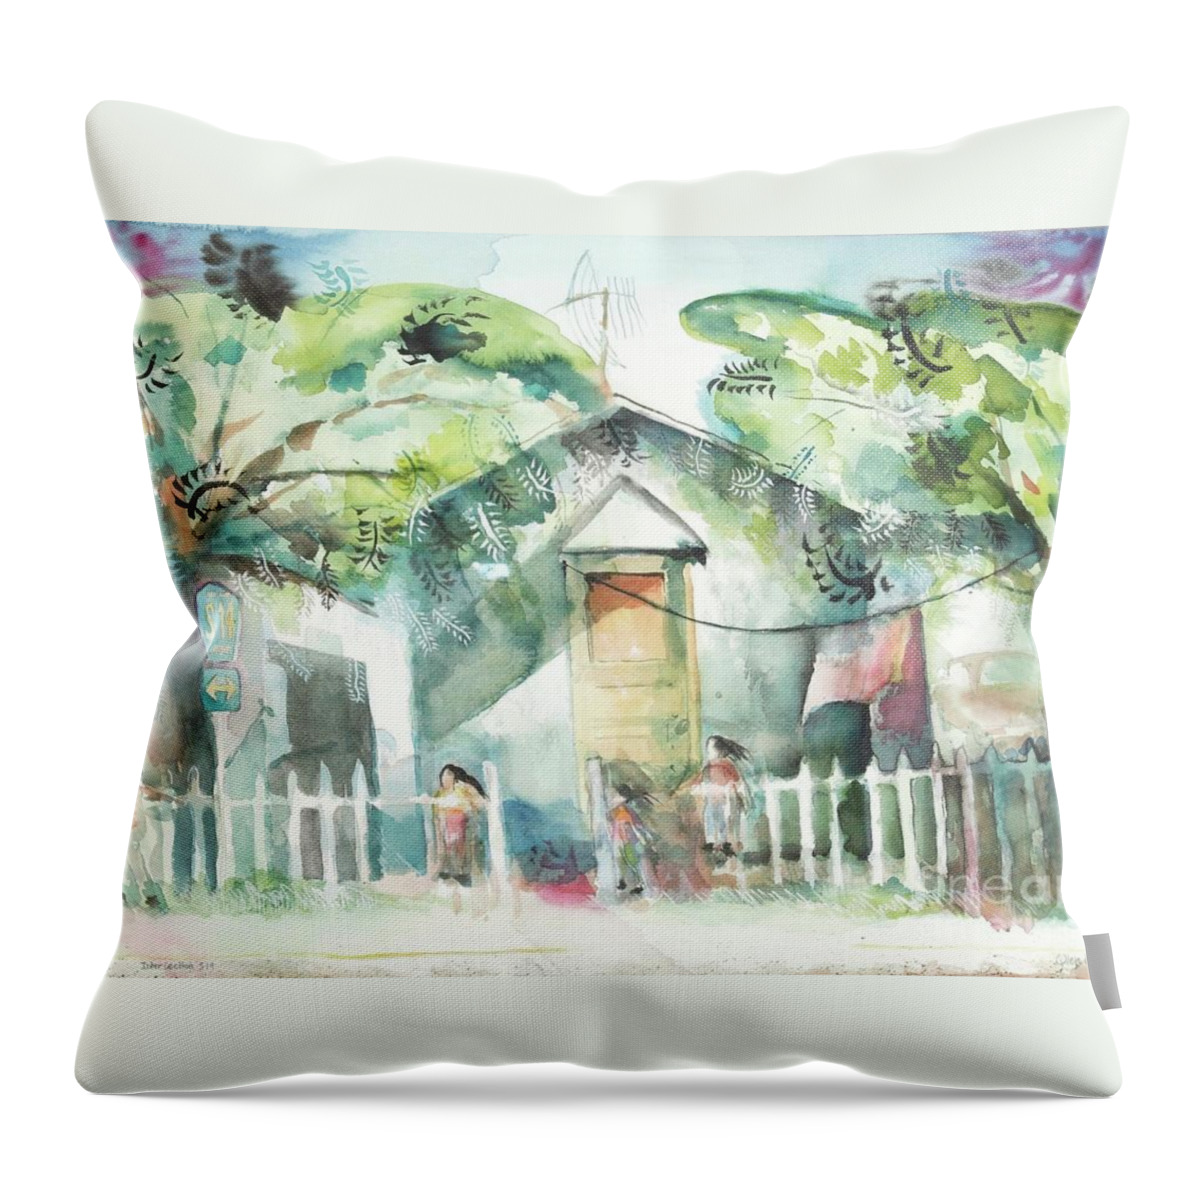 #children #play #childrenatplay #watercolor #watercolorpainting #rural #house #trees #picketfence #fence #door #s14 #southerncalifornia #california #vista #glenneff #neff #thesoundpoetsmusic #picturerockstudio Www.glenneff.com Throw Pillow featuring the painting Children at Play by Glen Neff